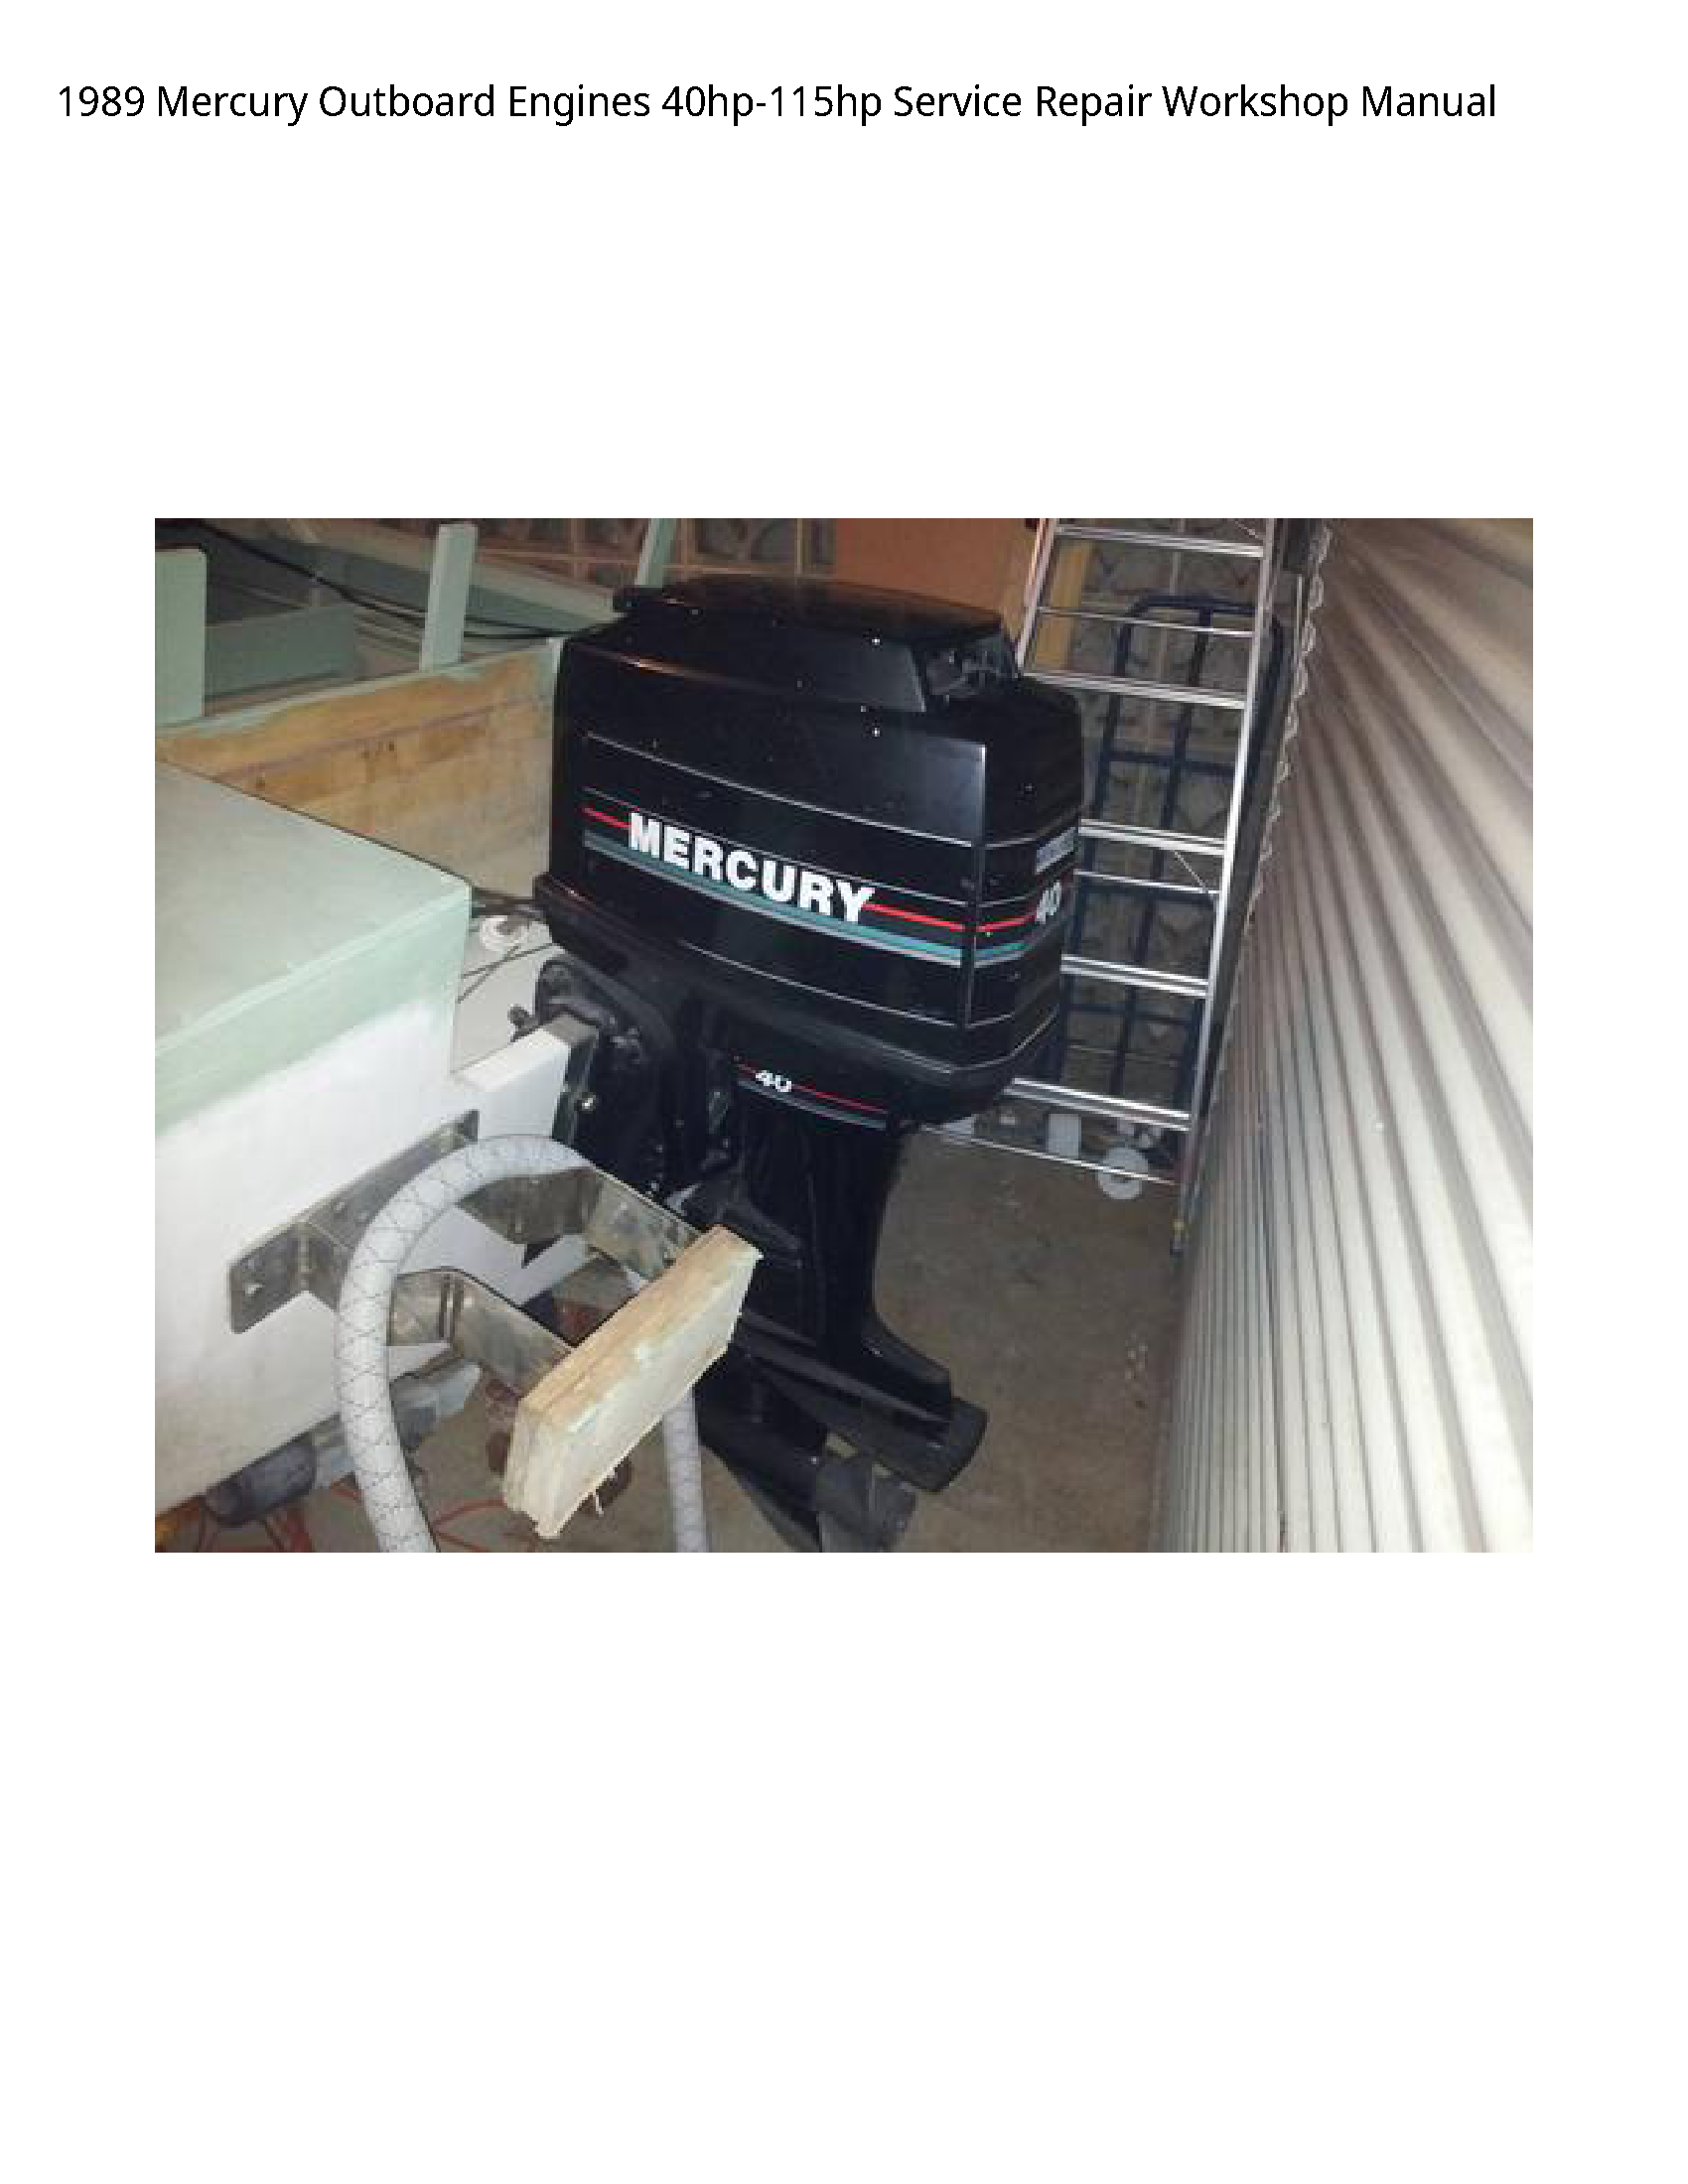 Mercury 40hp-115hp Outboard Engines manual